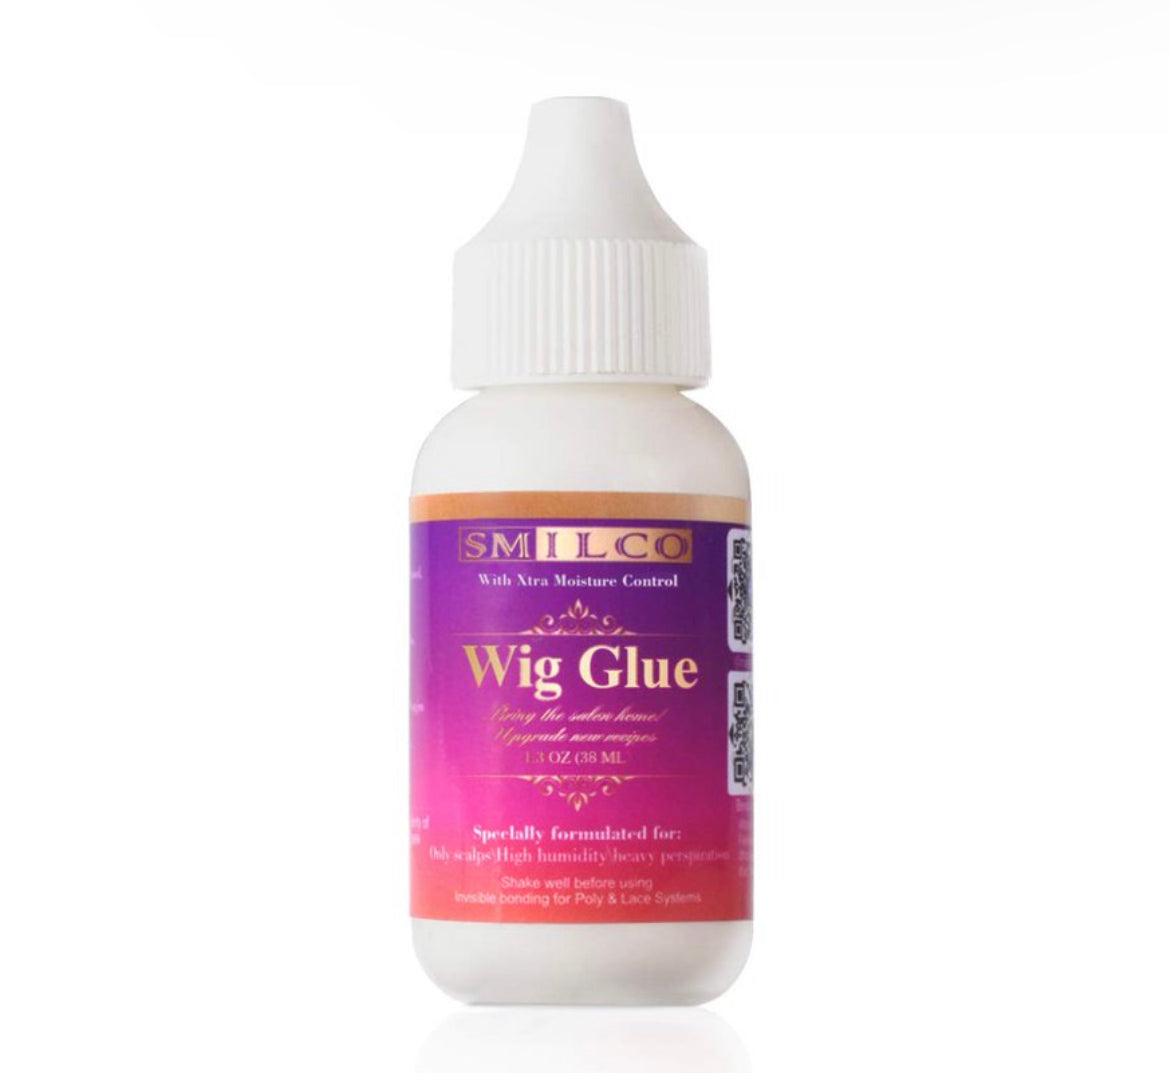 Smilco Wig Glue 1.3oz, Waterproof Lace Front Wig Glue for Wigs, Transparent Lace Adhesive for Hair Replacement, Strong Hold